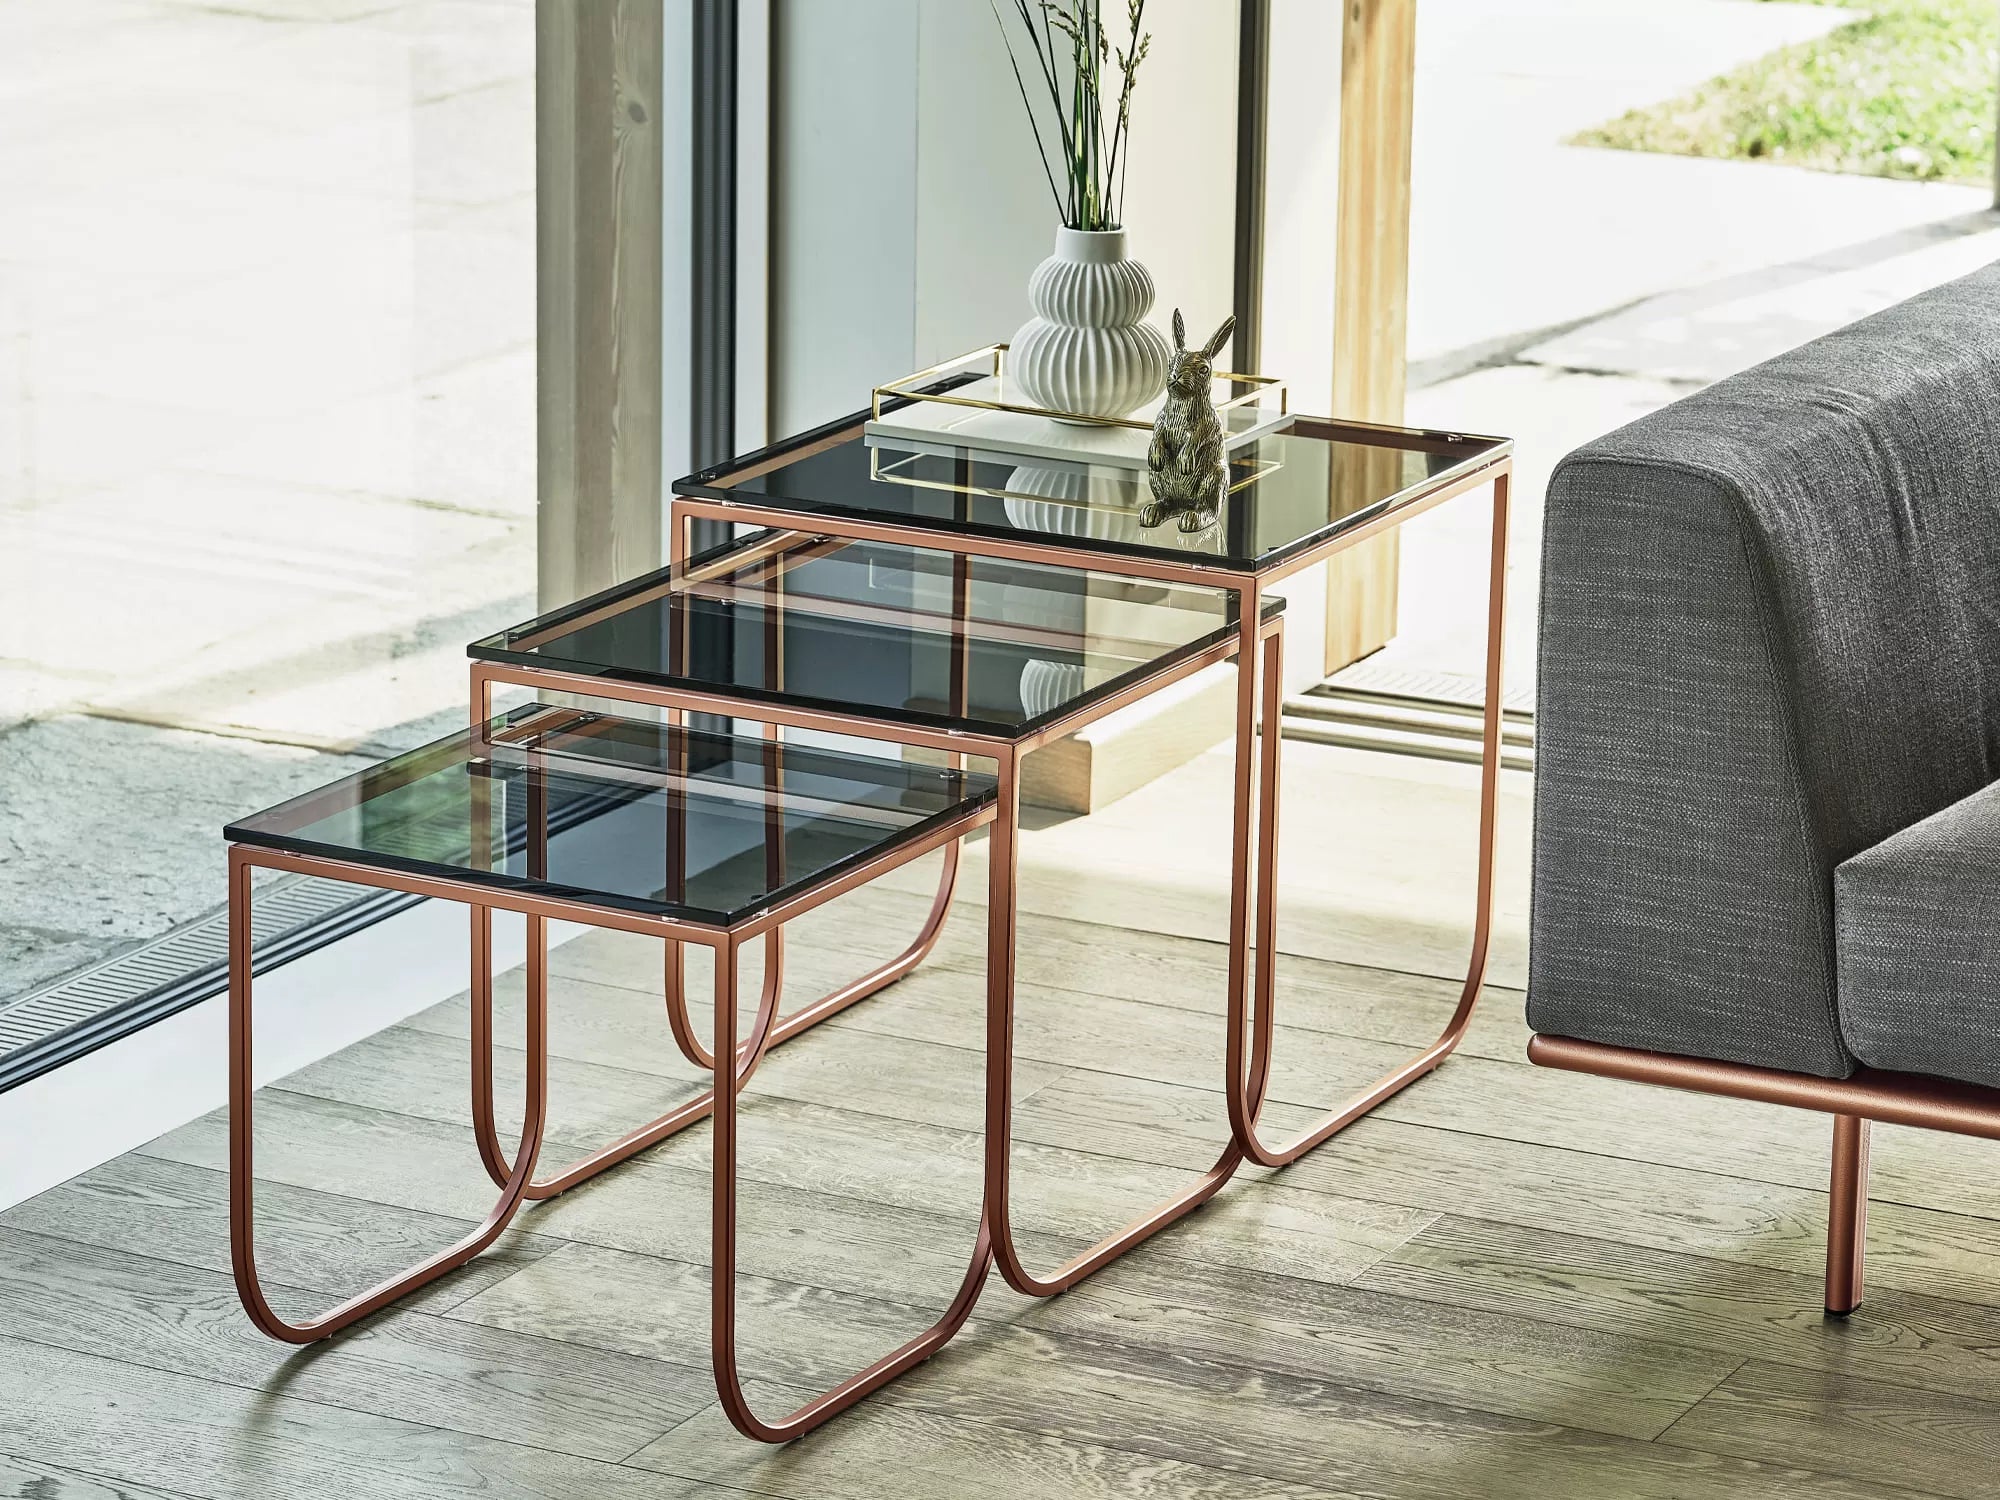 Tokio Coffee Table With Lacquered Metal Frame 08 19